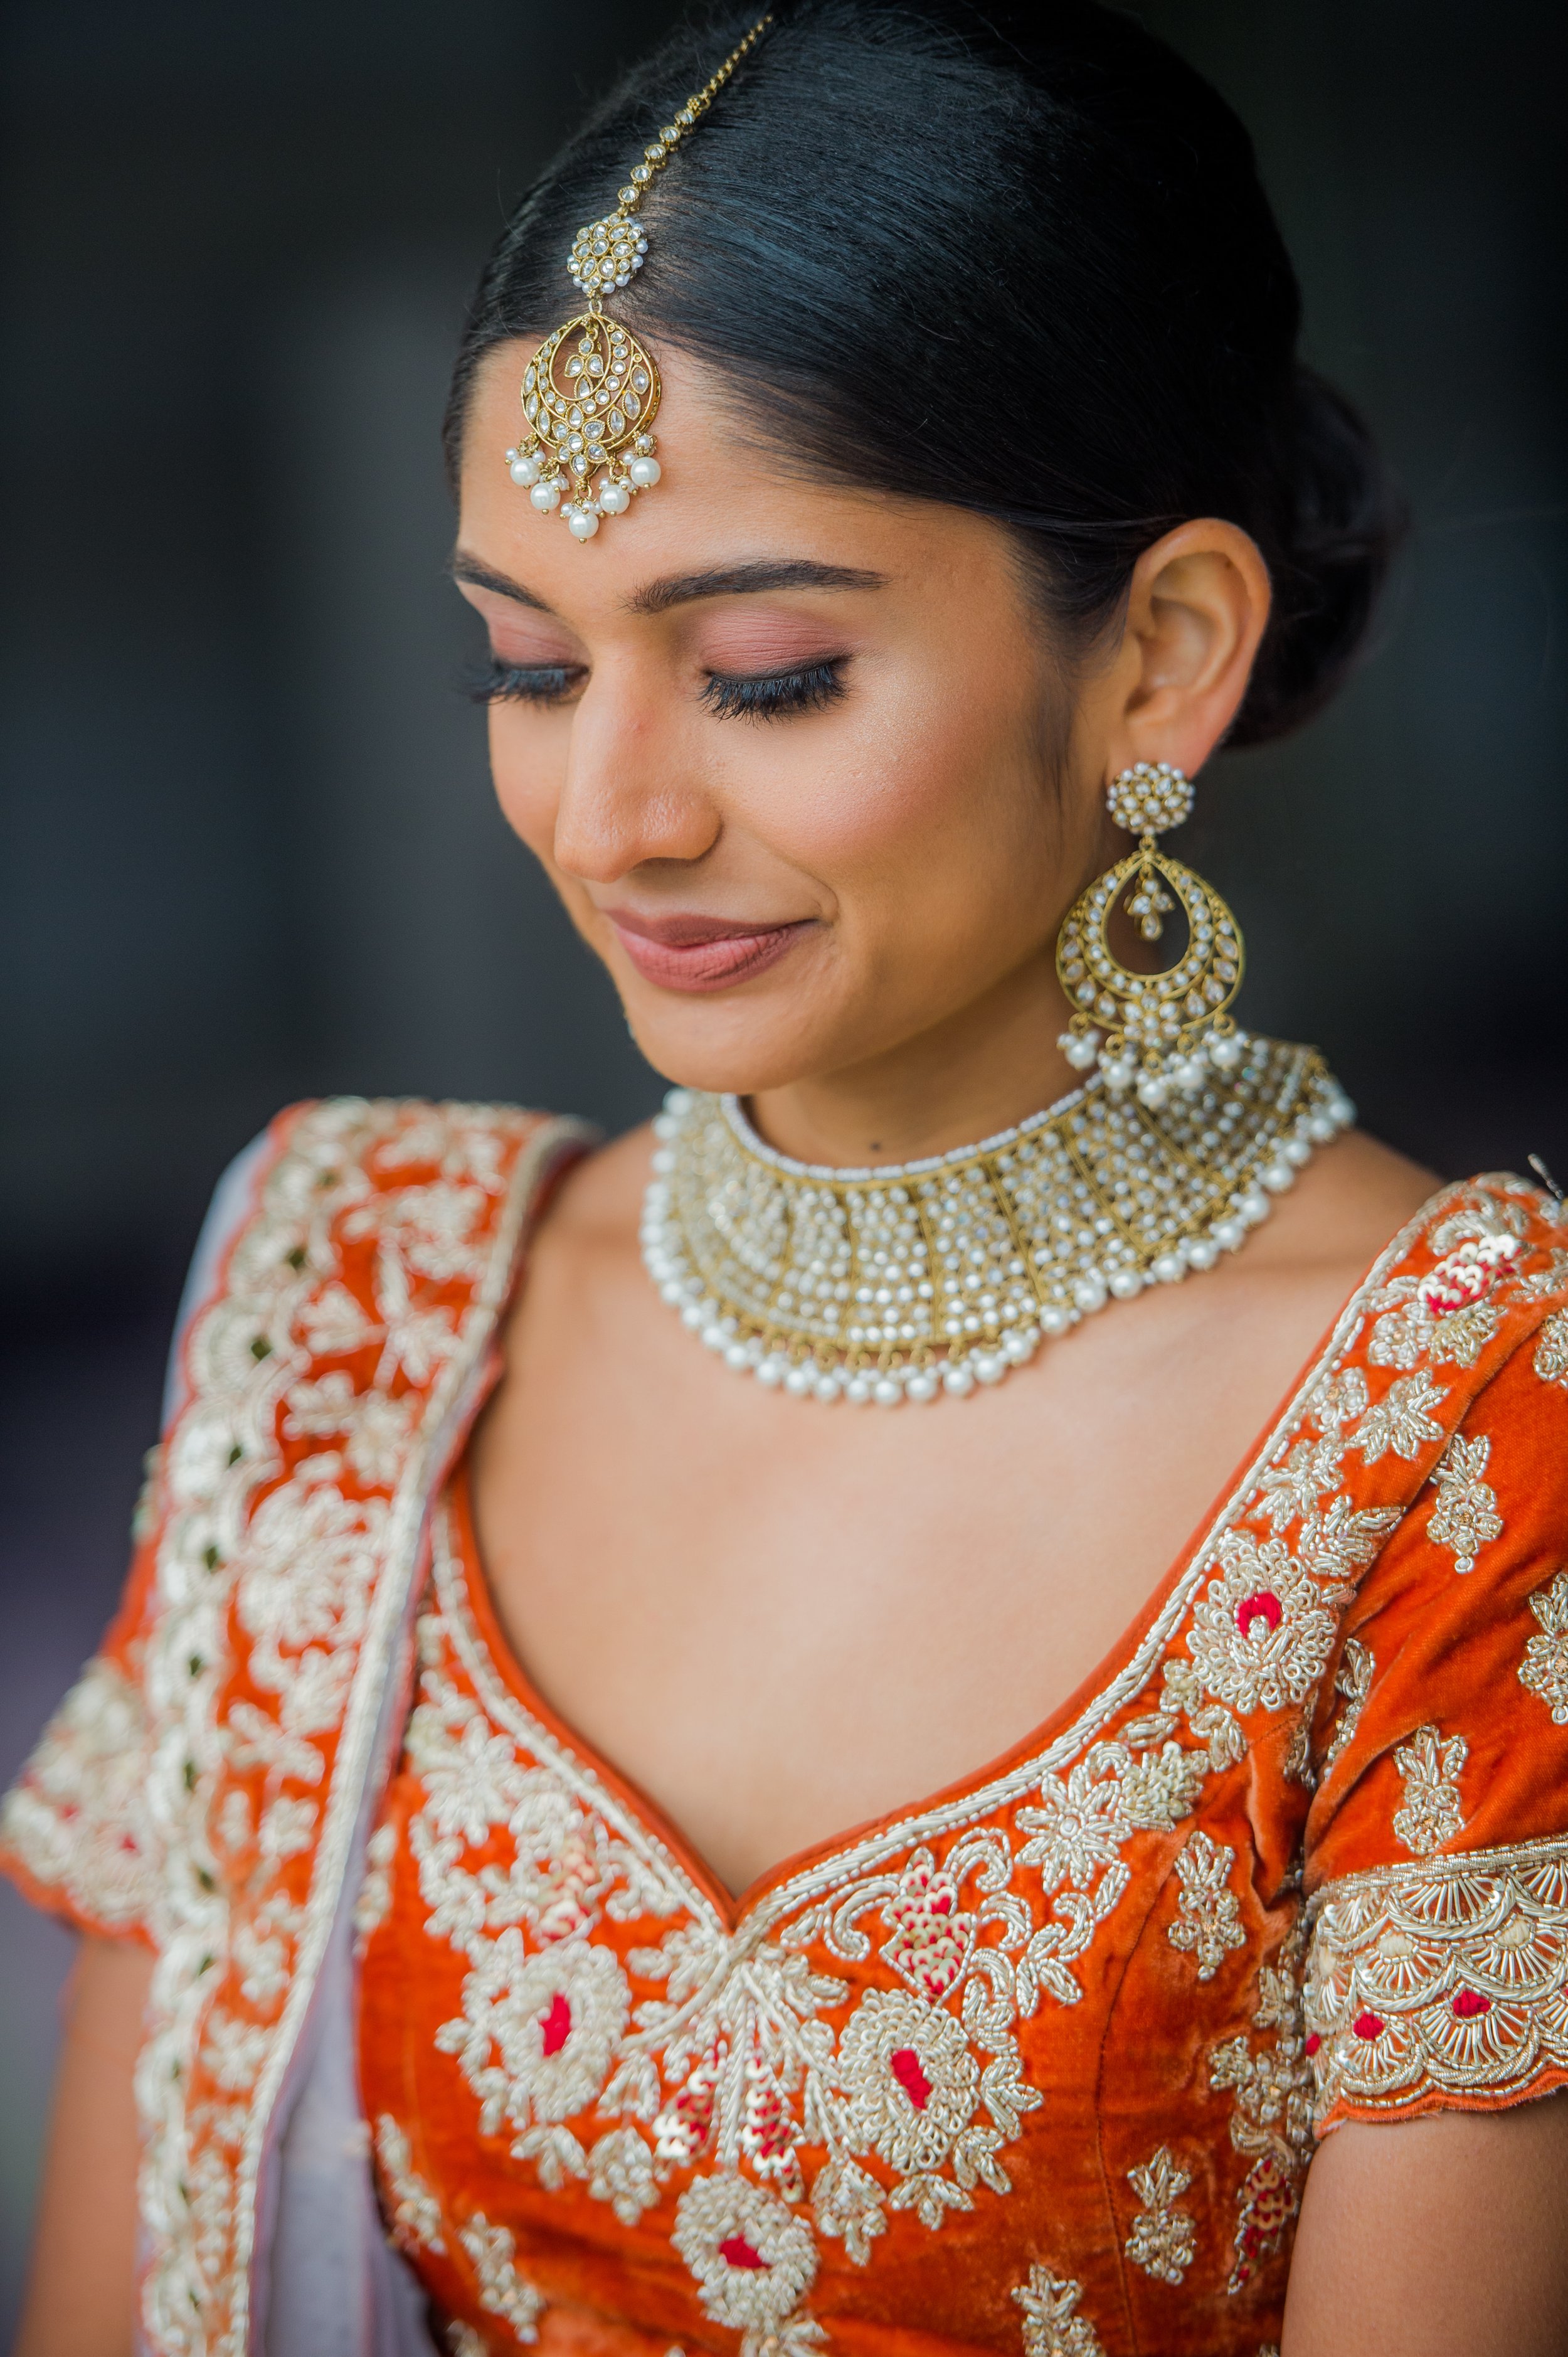 Vijils Bridal Makeover Studio - � #Bridesofkerala �#�#�#�makeupartist #Vijil  Bridal MakeUp & Hairstyling �#�Calicut #�Cochin�#�# �Kottayam�#�#  �Trivandrum�#��# �Kannur�##All over South India�# #Best# �#�#Hairstyle�#  �#�#HDMakeup�# #�#AIRBRUSH For a bride, wedding should all about